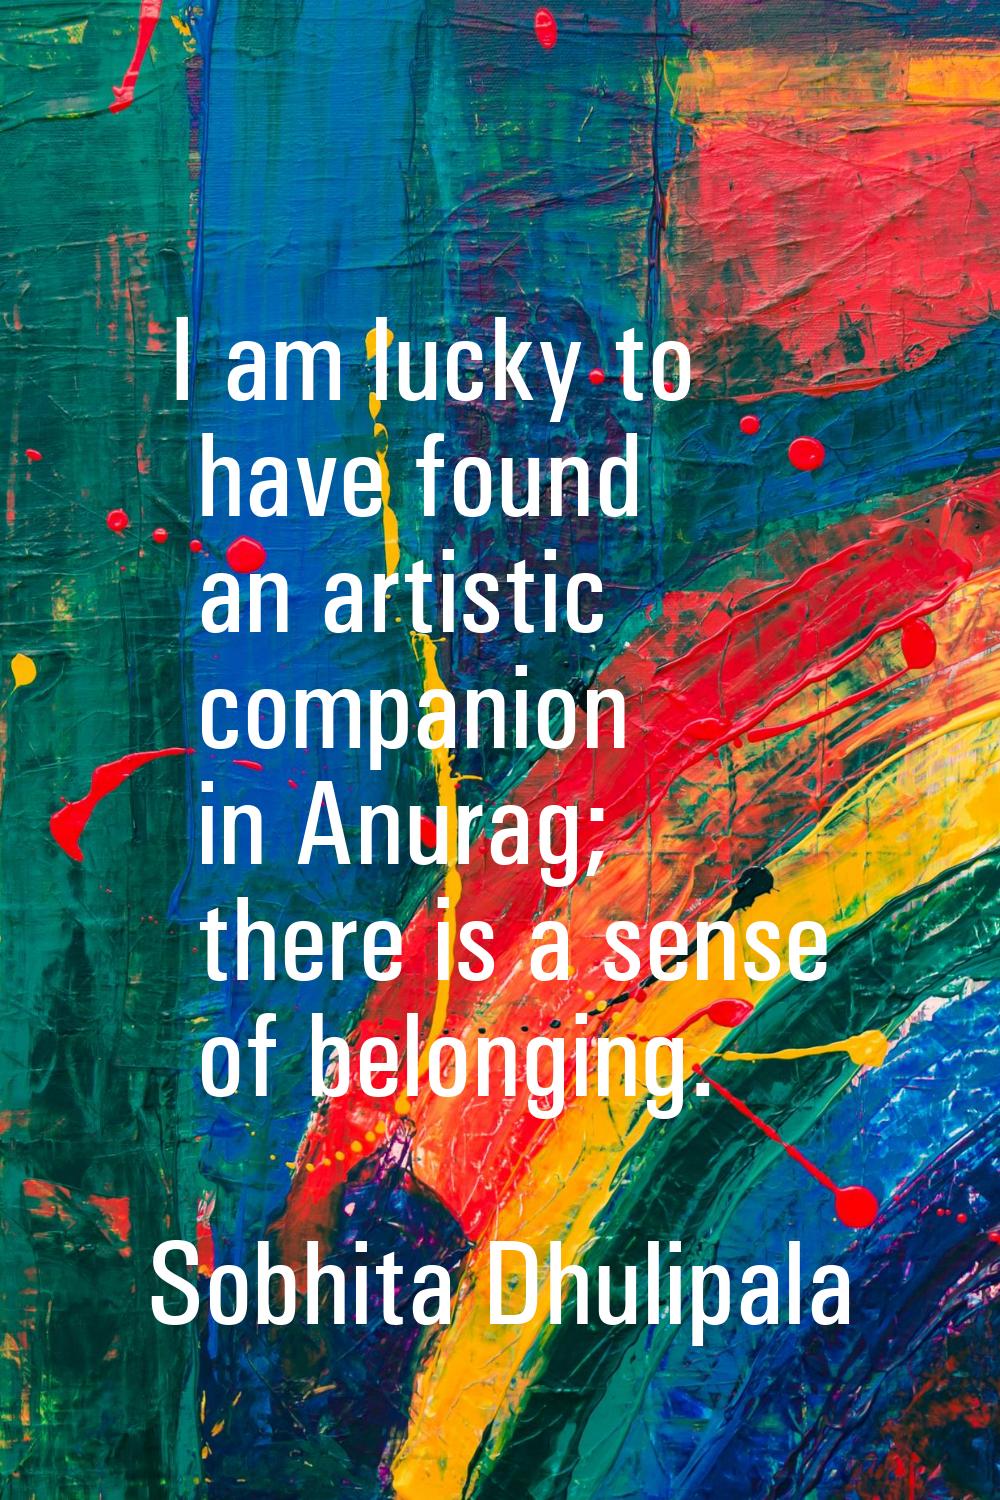 I am lucky to have found an artistic companion in Anurag; there is a sense of belonging.